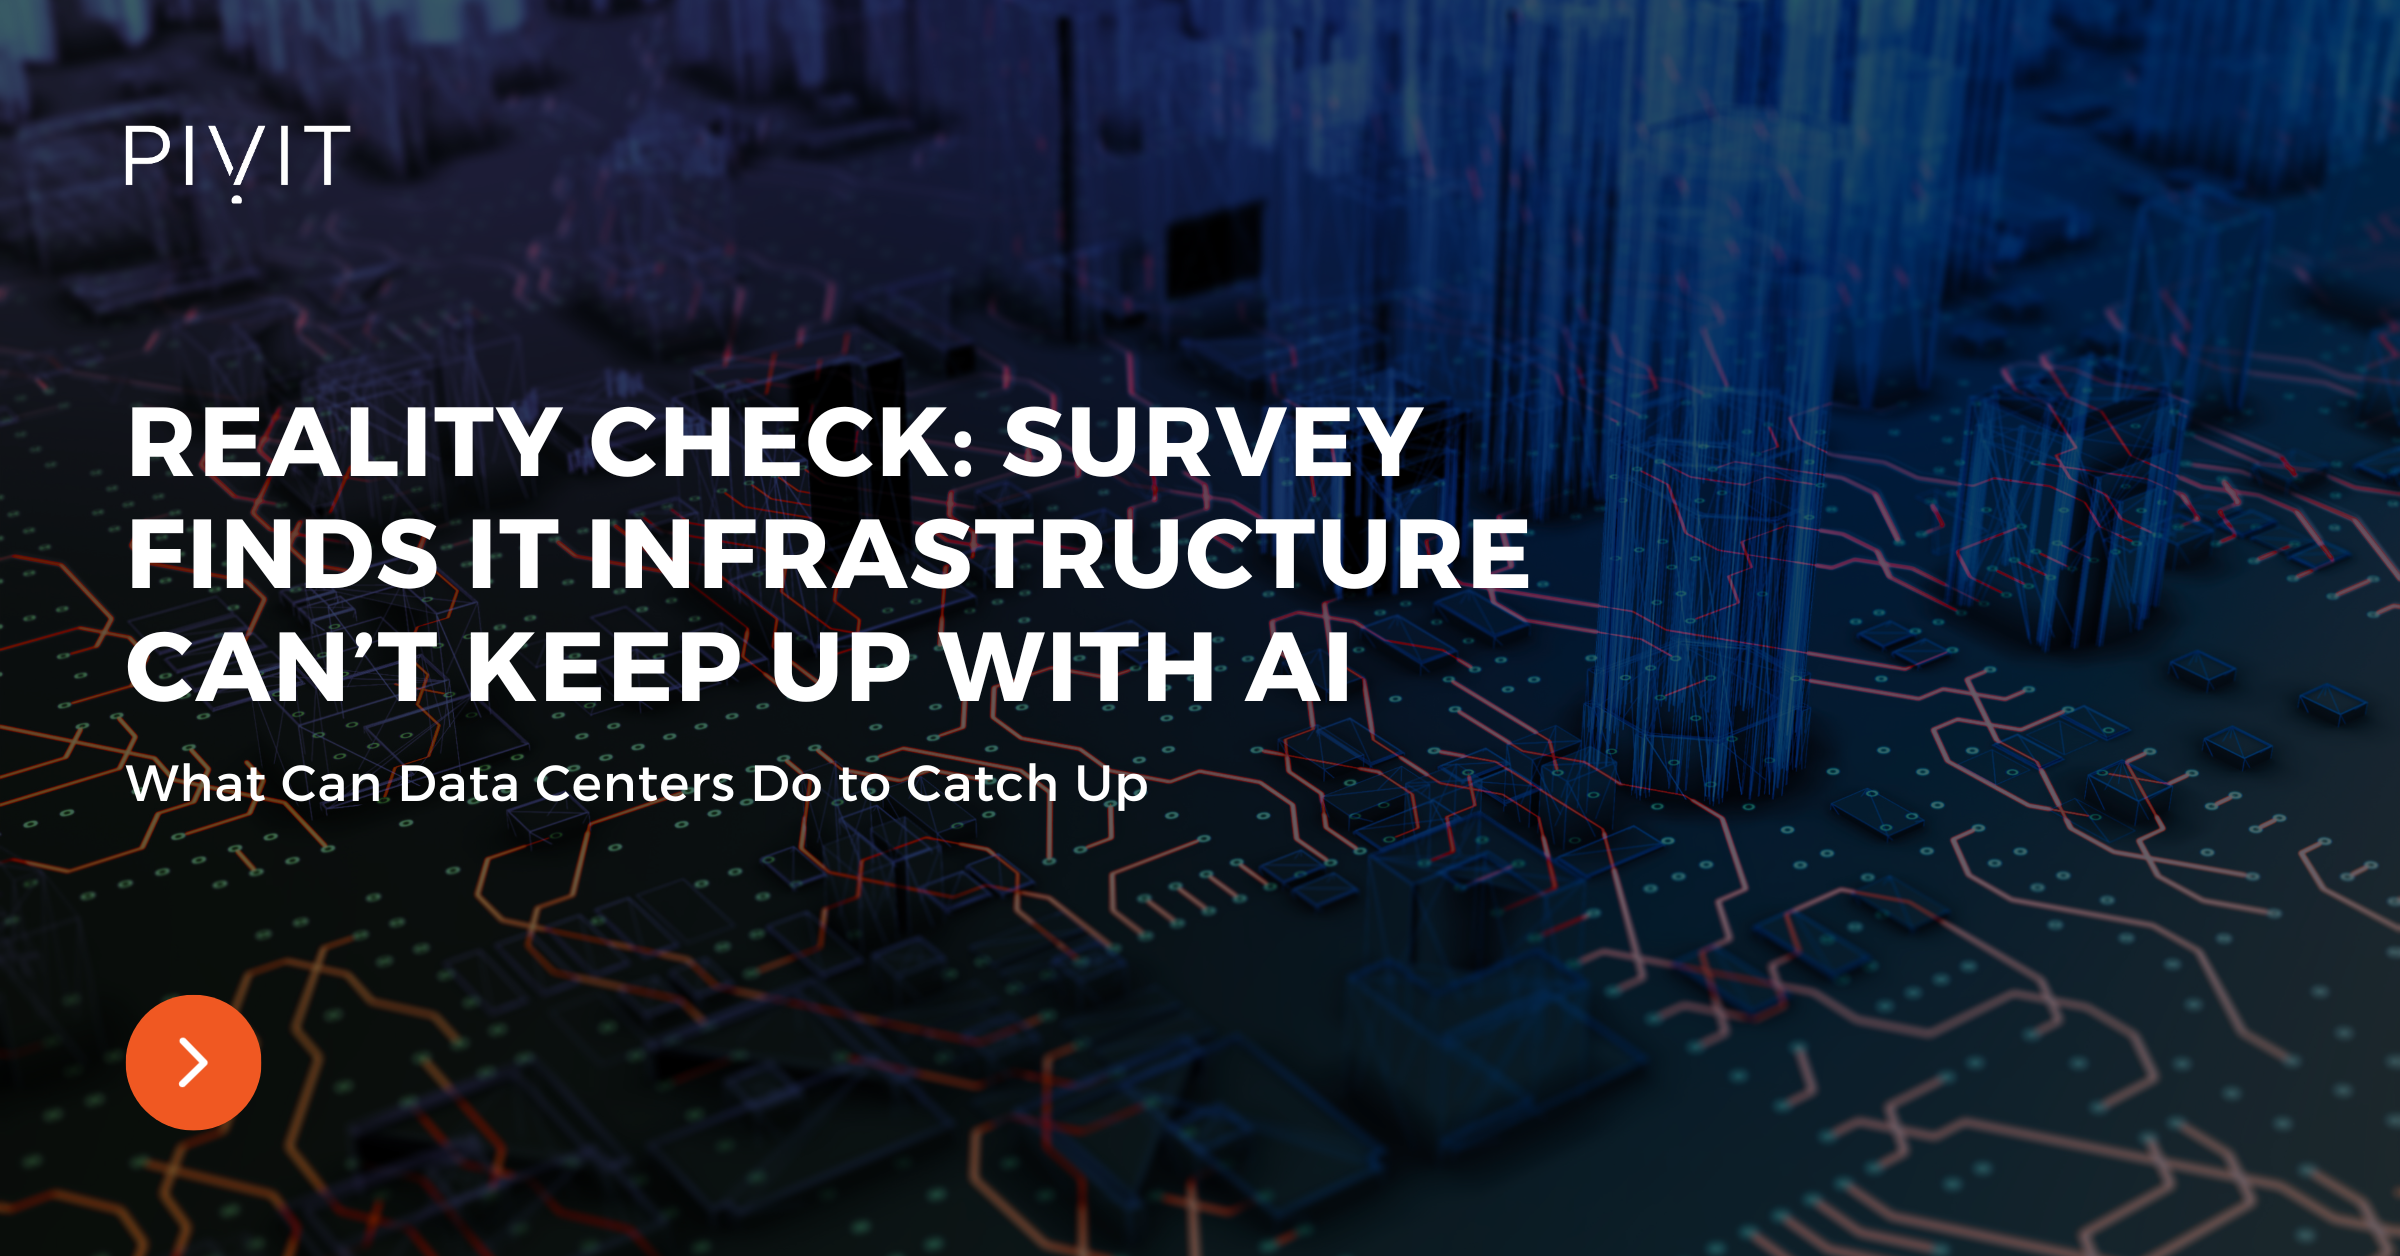 Reality Check: Survey Finds IT Infrastructure Can’t Keep Up With AI - What Can Data Centers Do to Catch Up